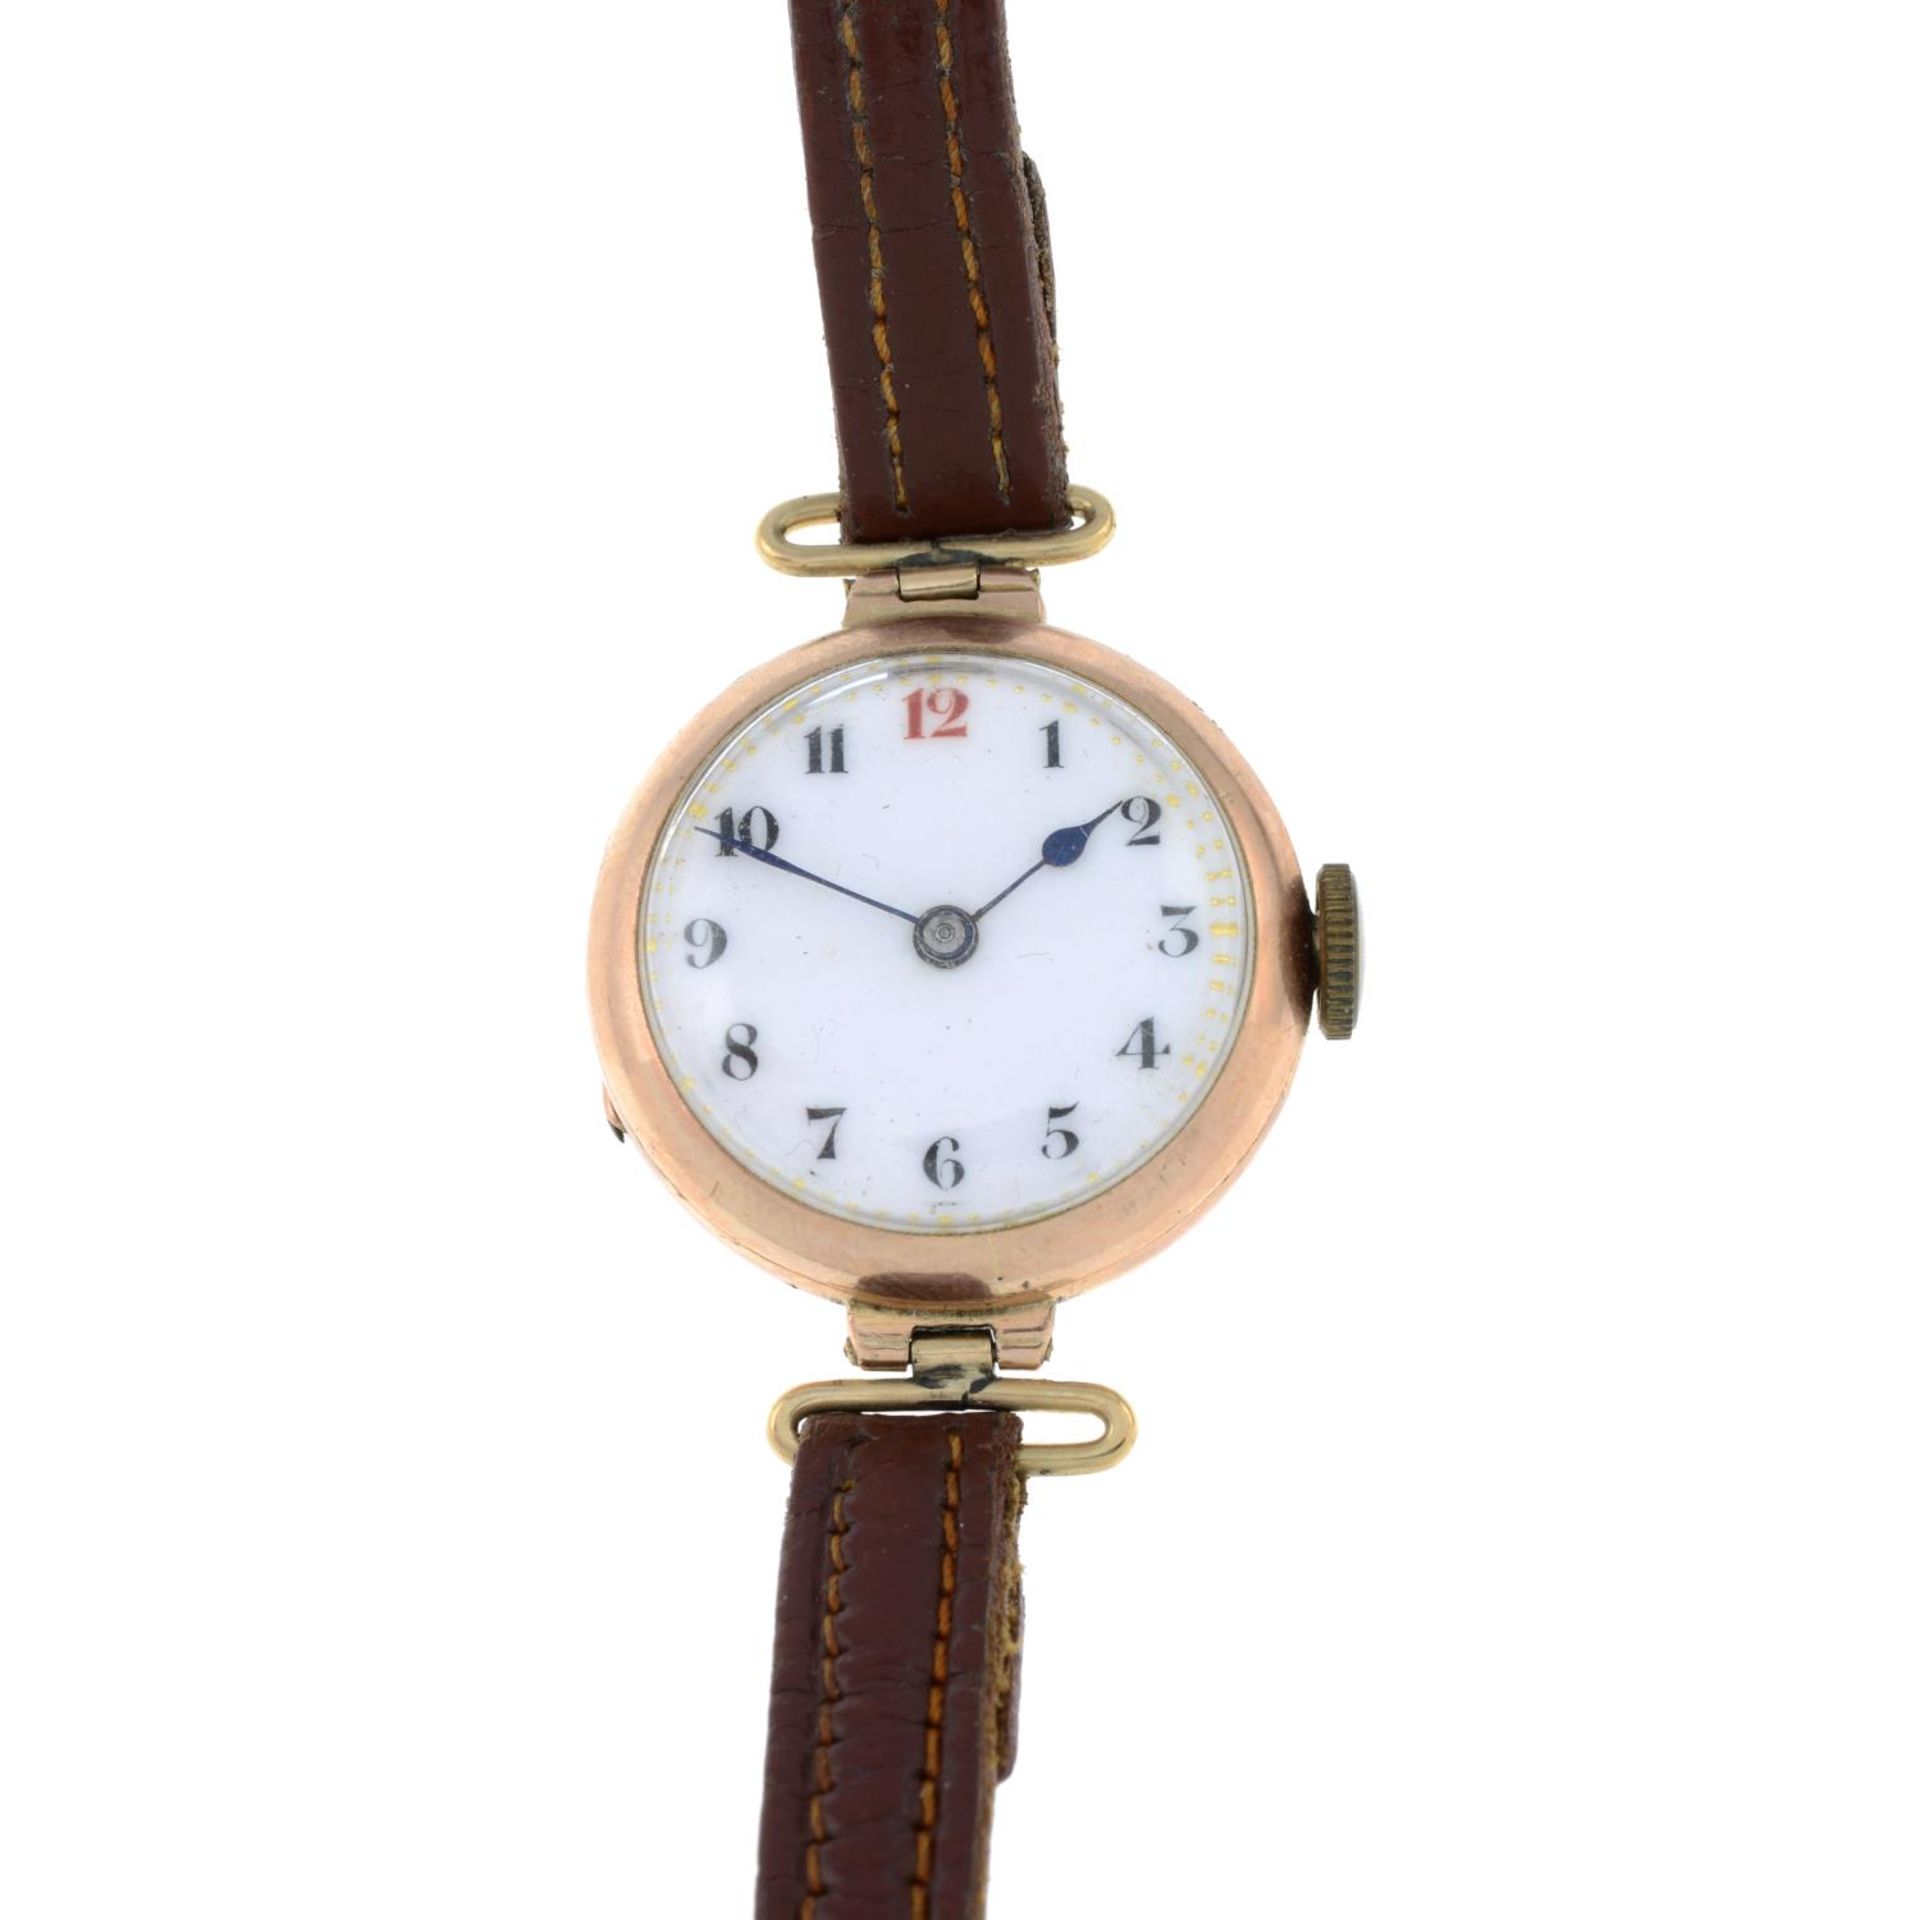 A lady's early 20th century gold and enamel wrist watch, with strap replacement.